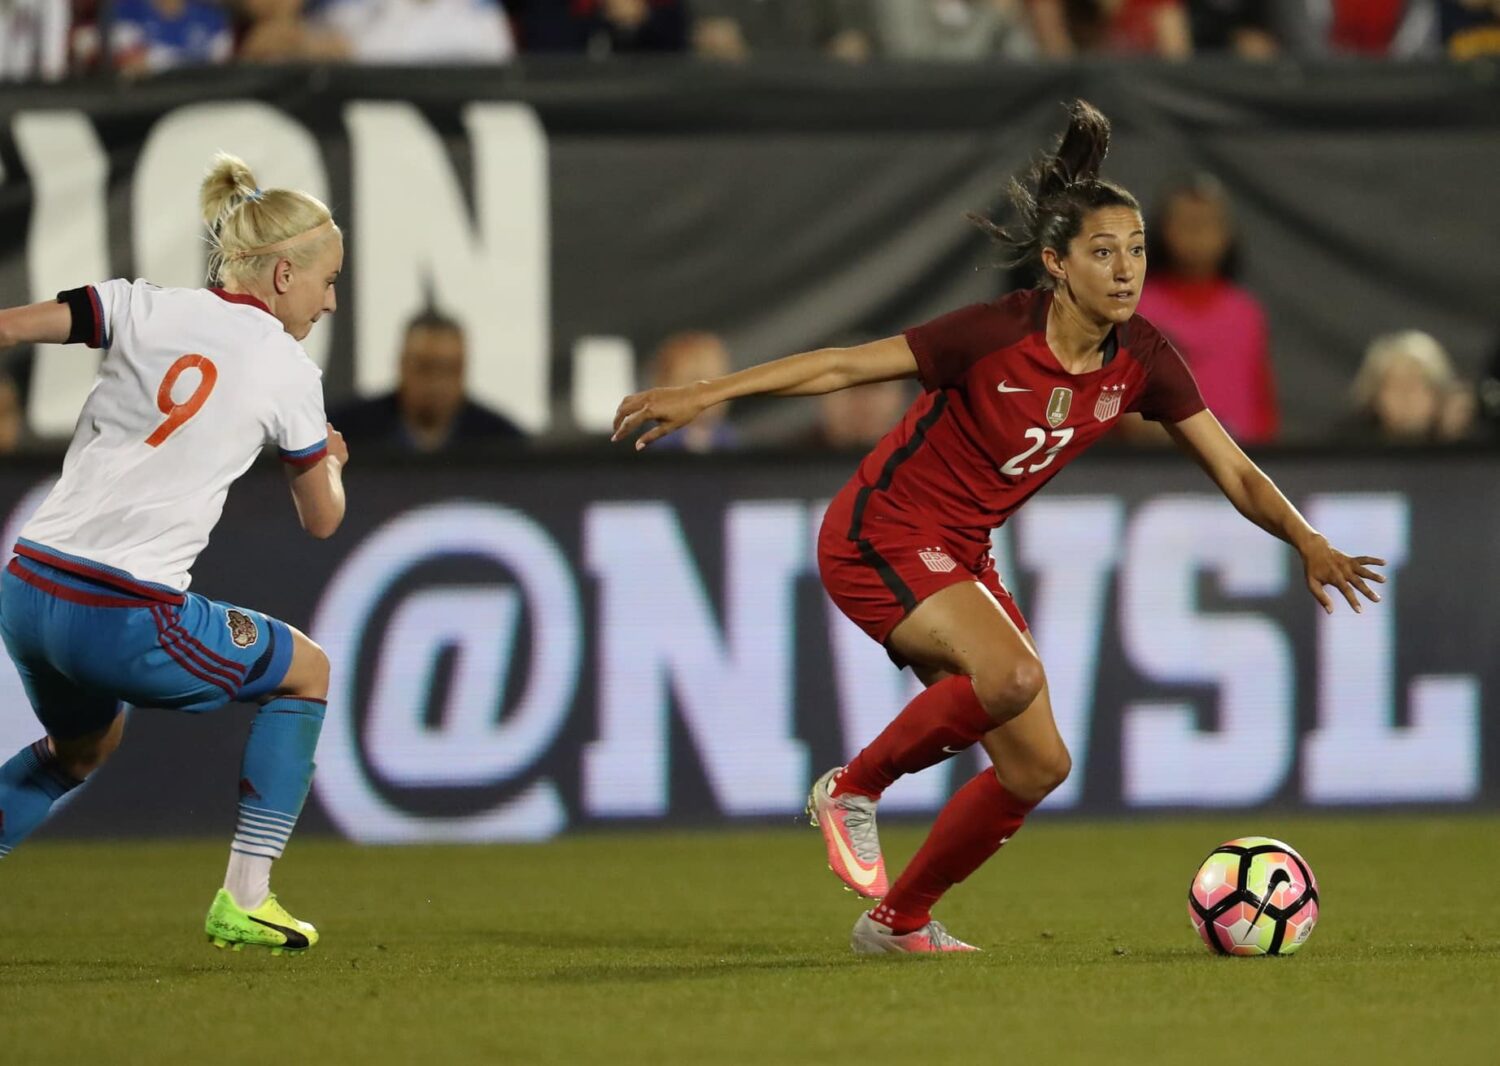 Apr 6, 2017; Frisco, TX, USA; USA forward Christen Press (23) controls the ball in the second half against Russia at Toyota Stadium. US beat Russia 4-0.